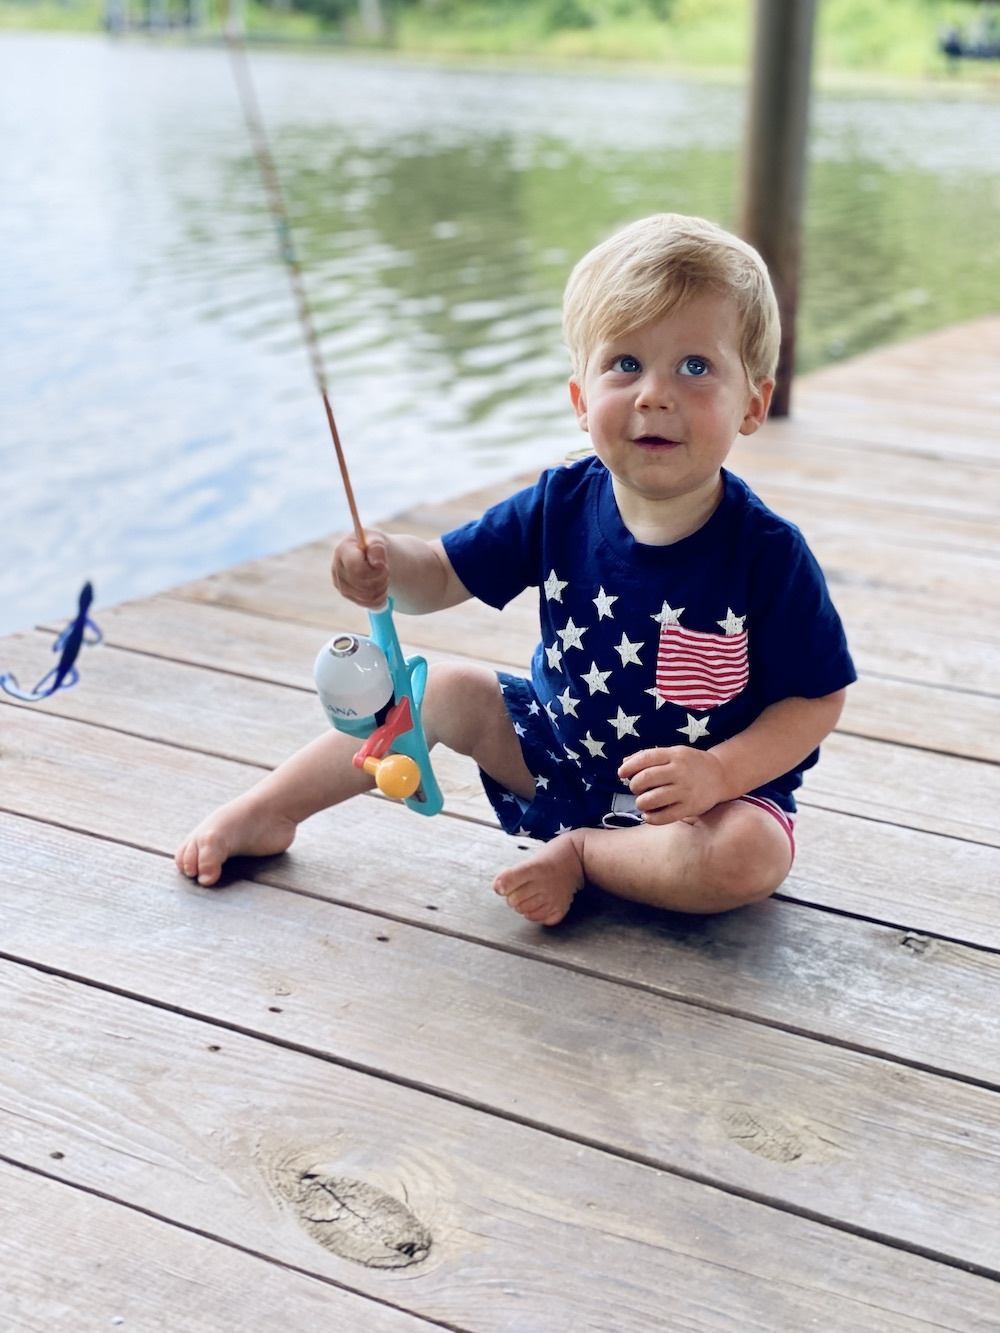 Drew's son with a fishing pole